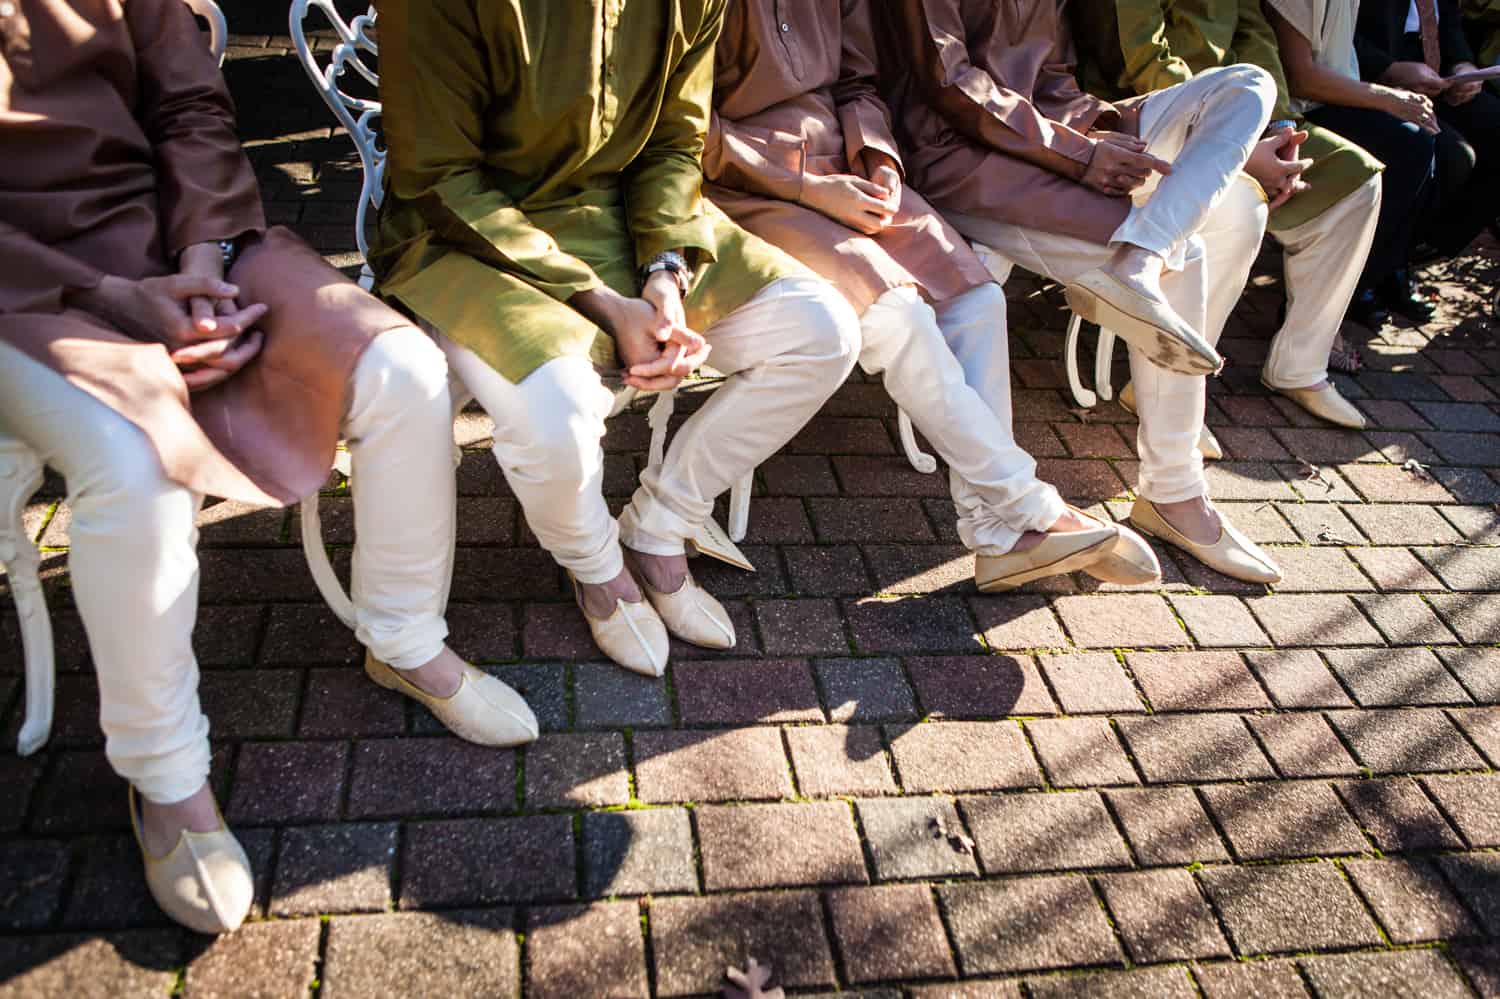 Close up on traditional Indian footwear of groomsmen